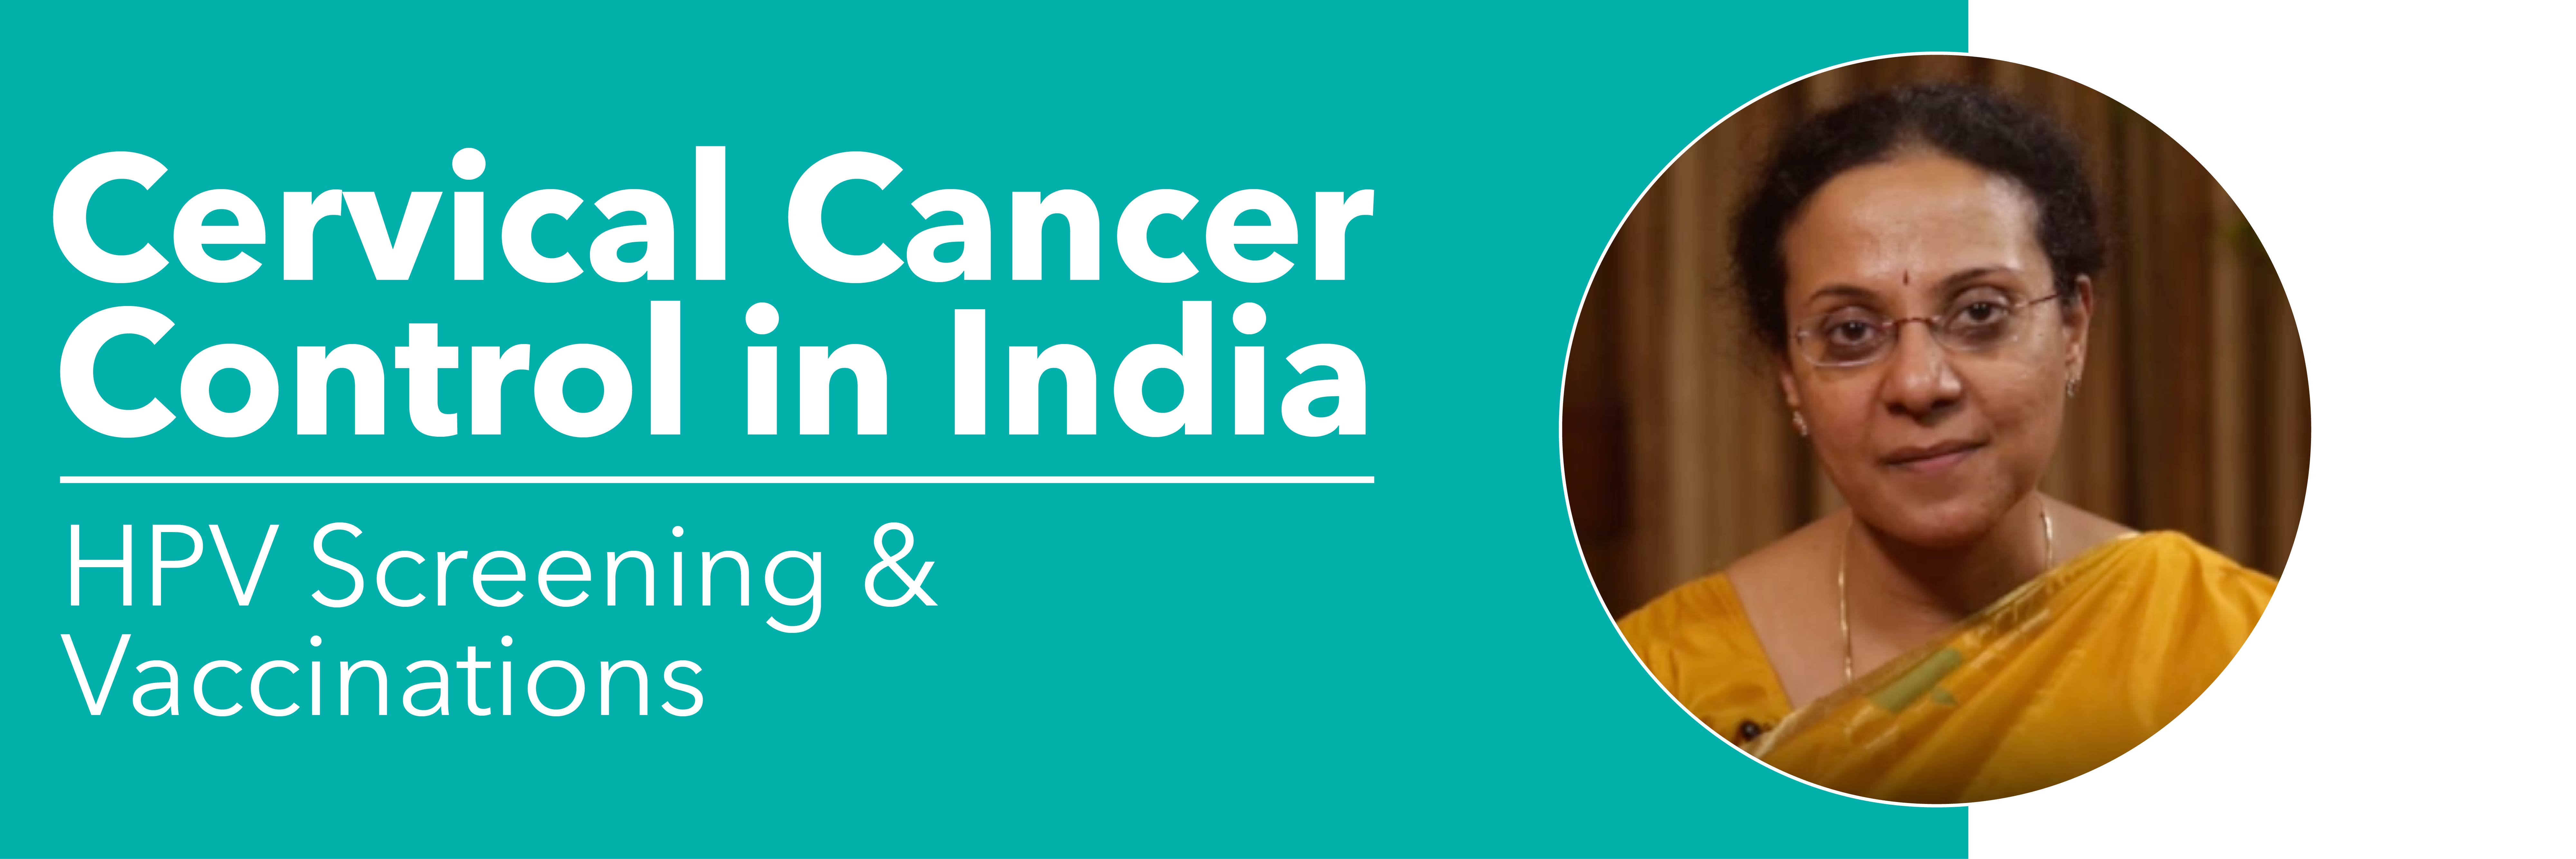 Cervical cancer - HPV screening and vaccination in India